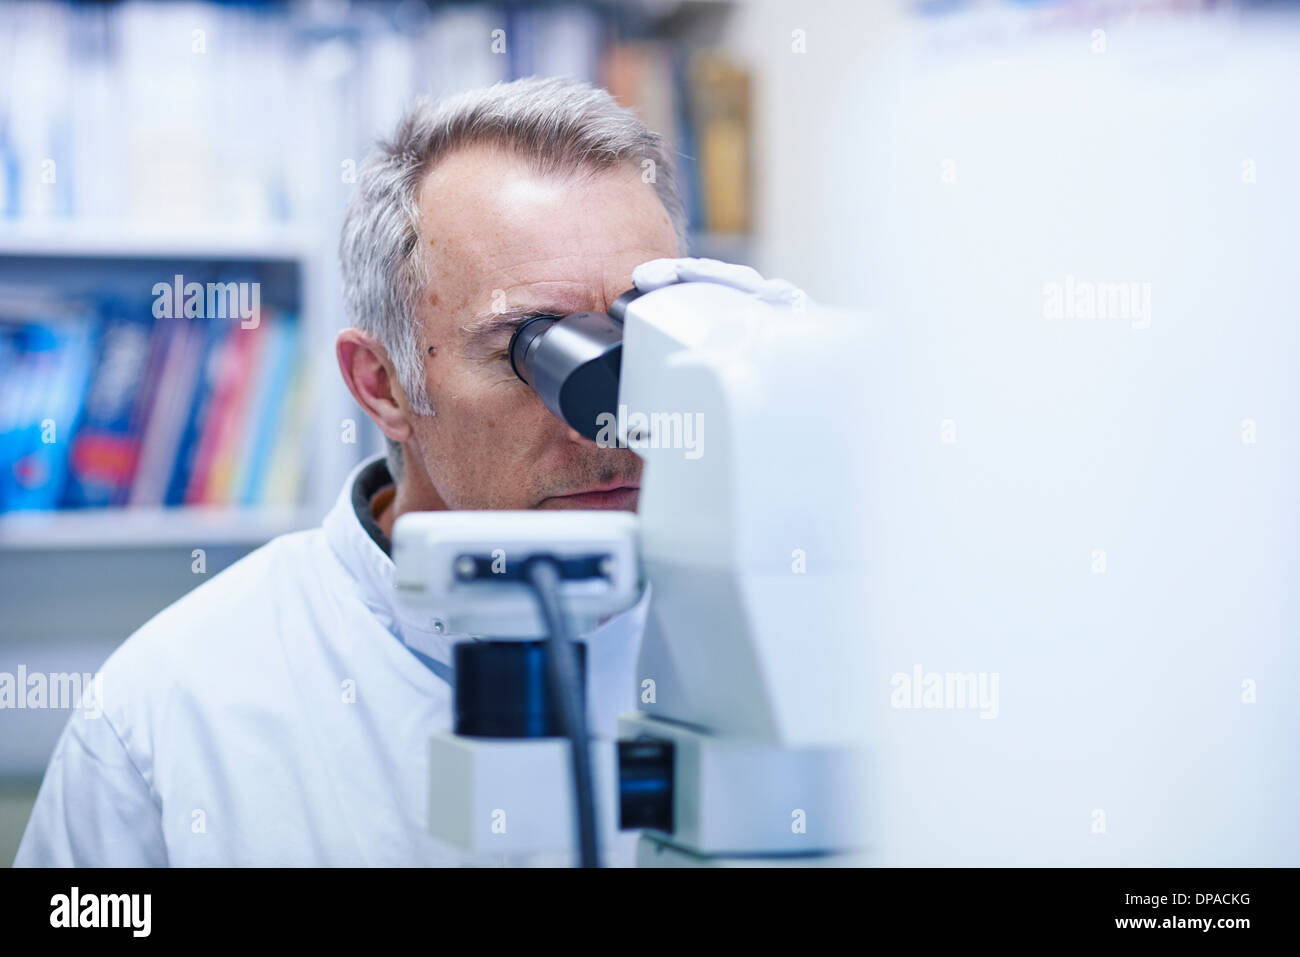 Man looking through microscope Banque D'Images